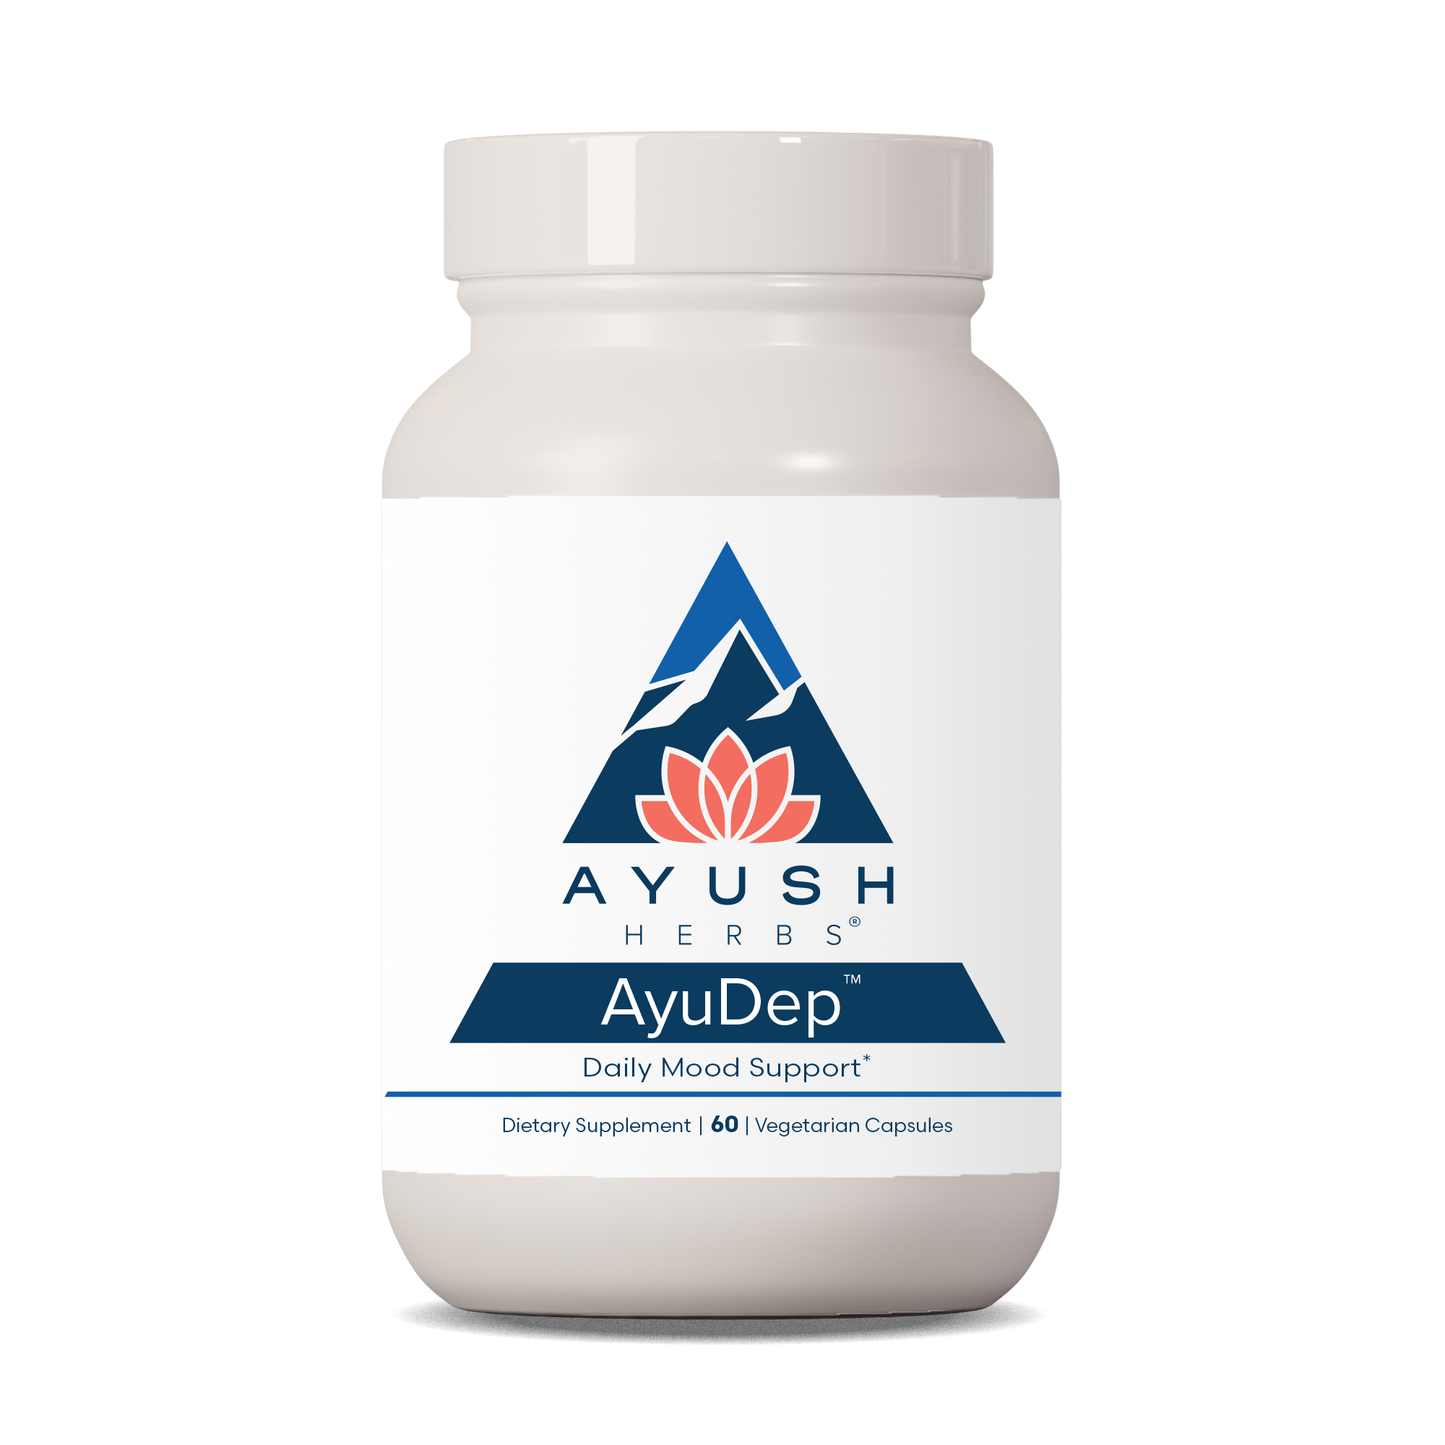 AyuDep bottle front by Ayush herbs herbal supplements